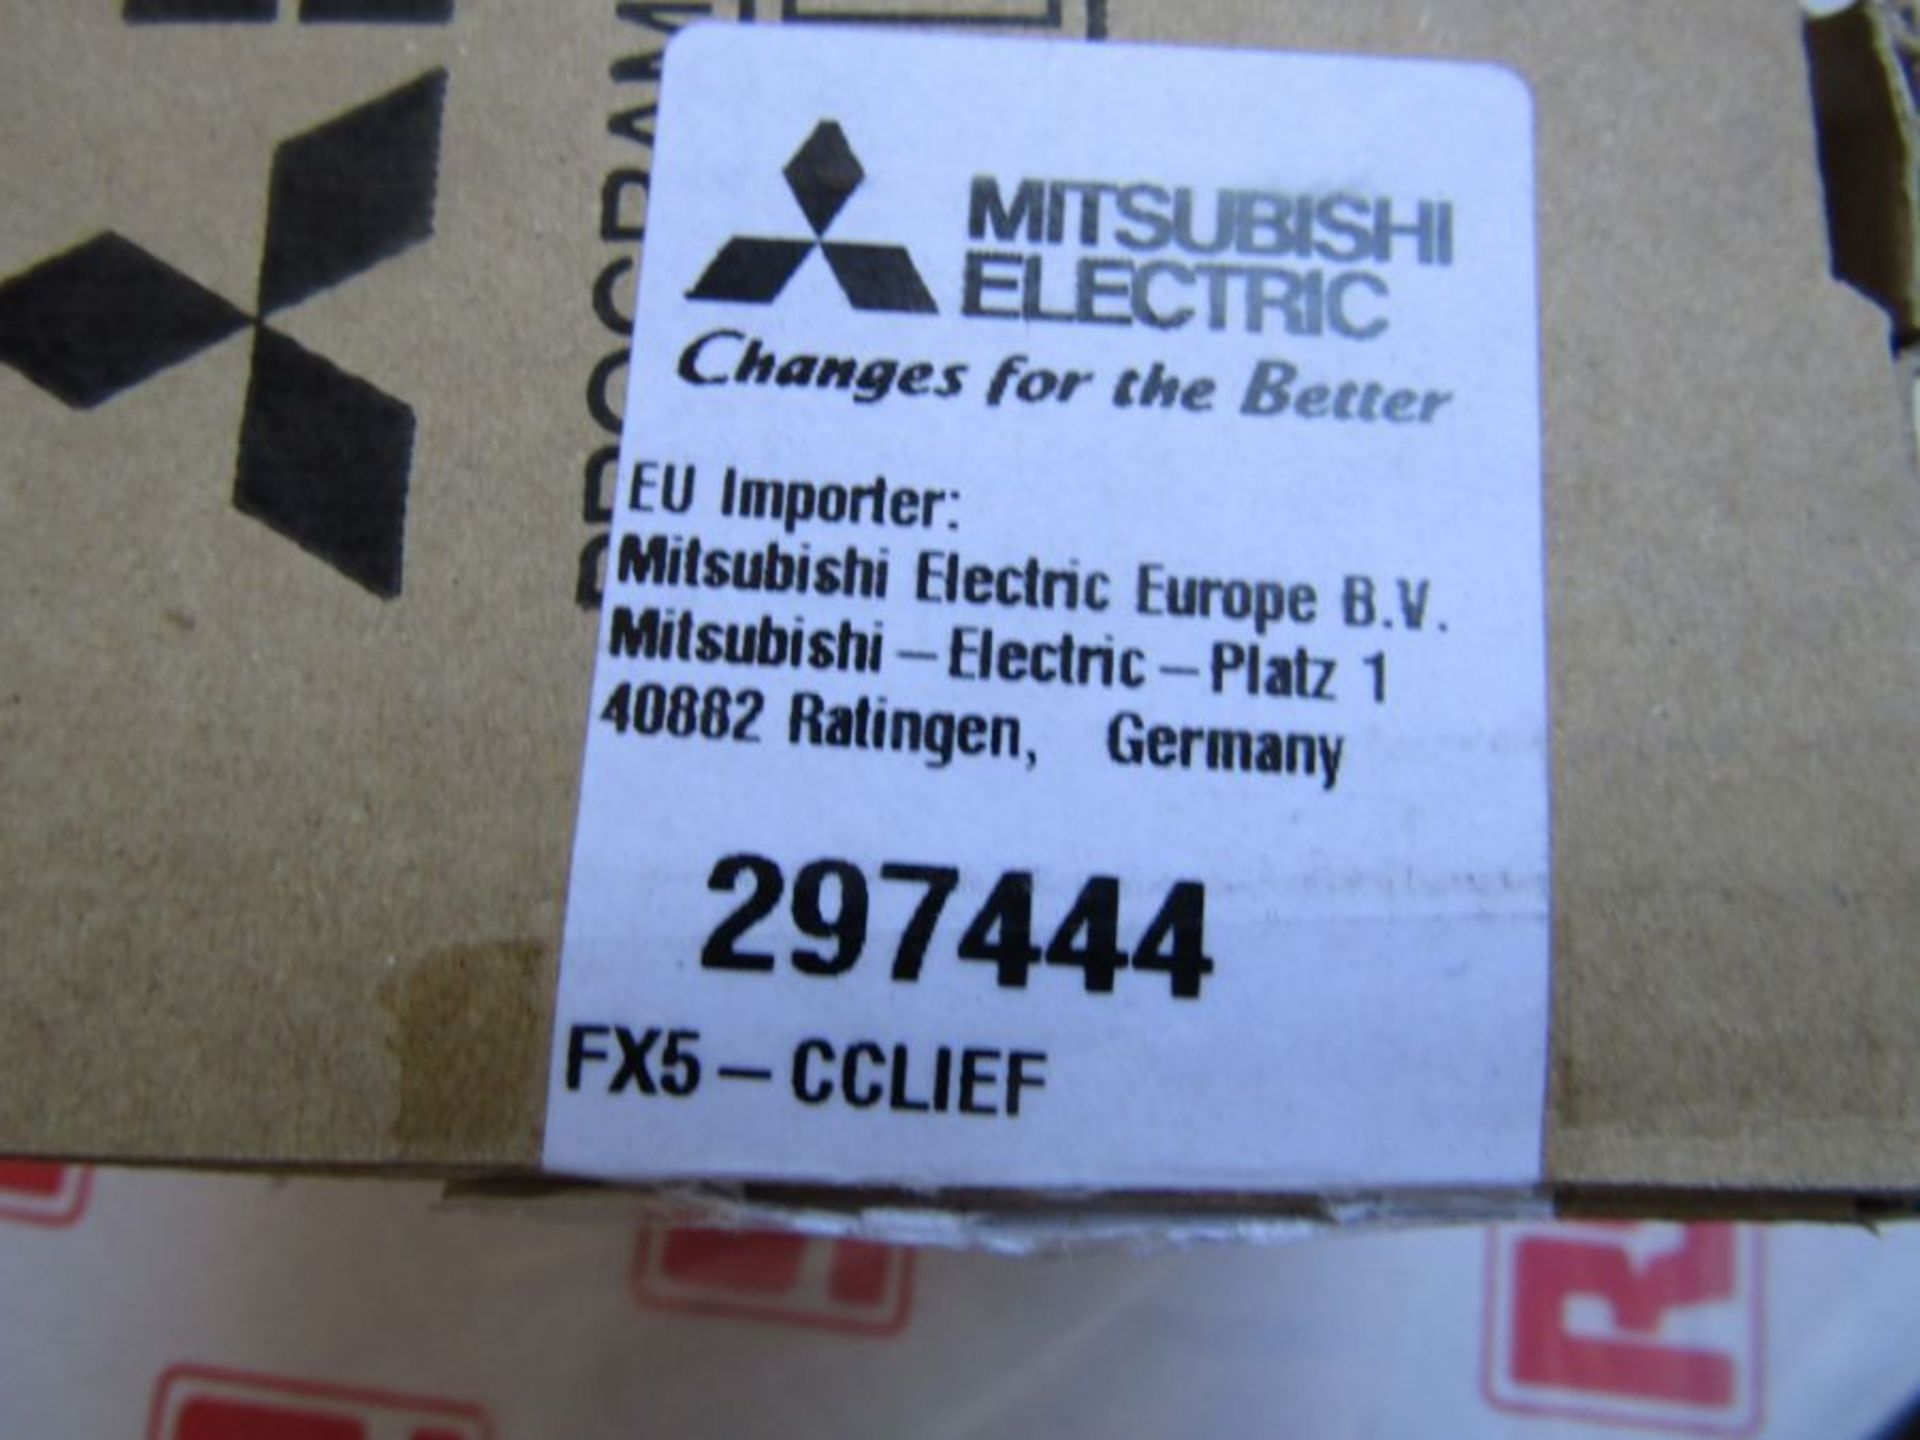 Mitsubishi - Expansion Module for MELSEC iQ-F PLC FX5-CCLIEF A3 1359294 - Image 2 of 6